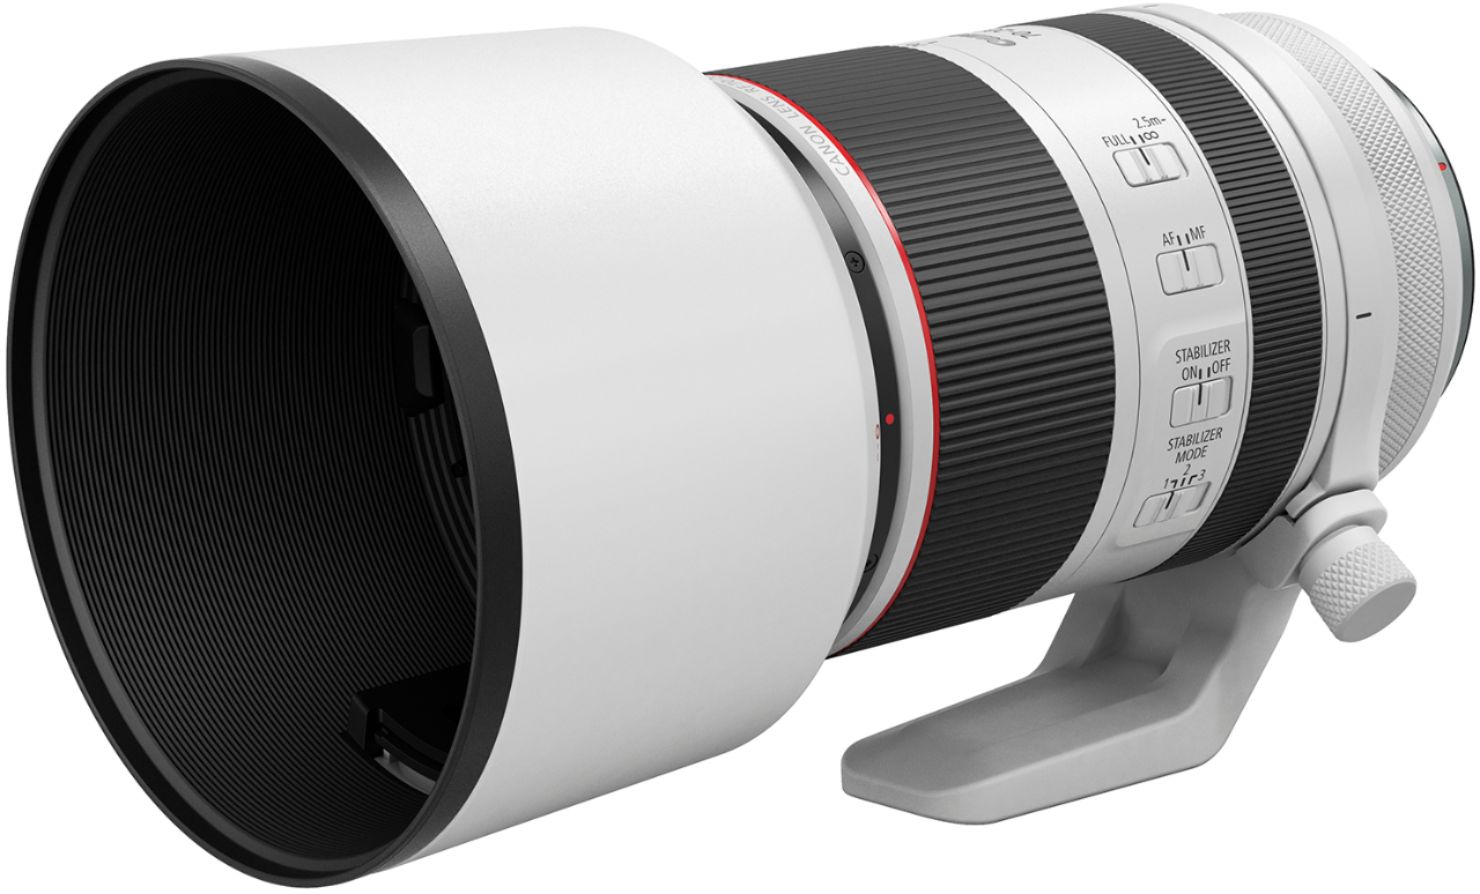 Canon RF 70-200mm f/2.8L IS USM Telephoto Zoom Lens for EOS R Cameras  3792C002 - Best Buy